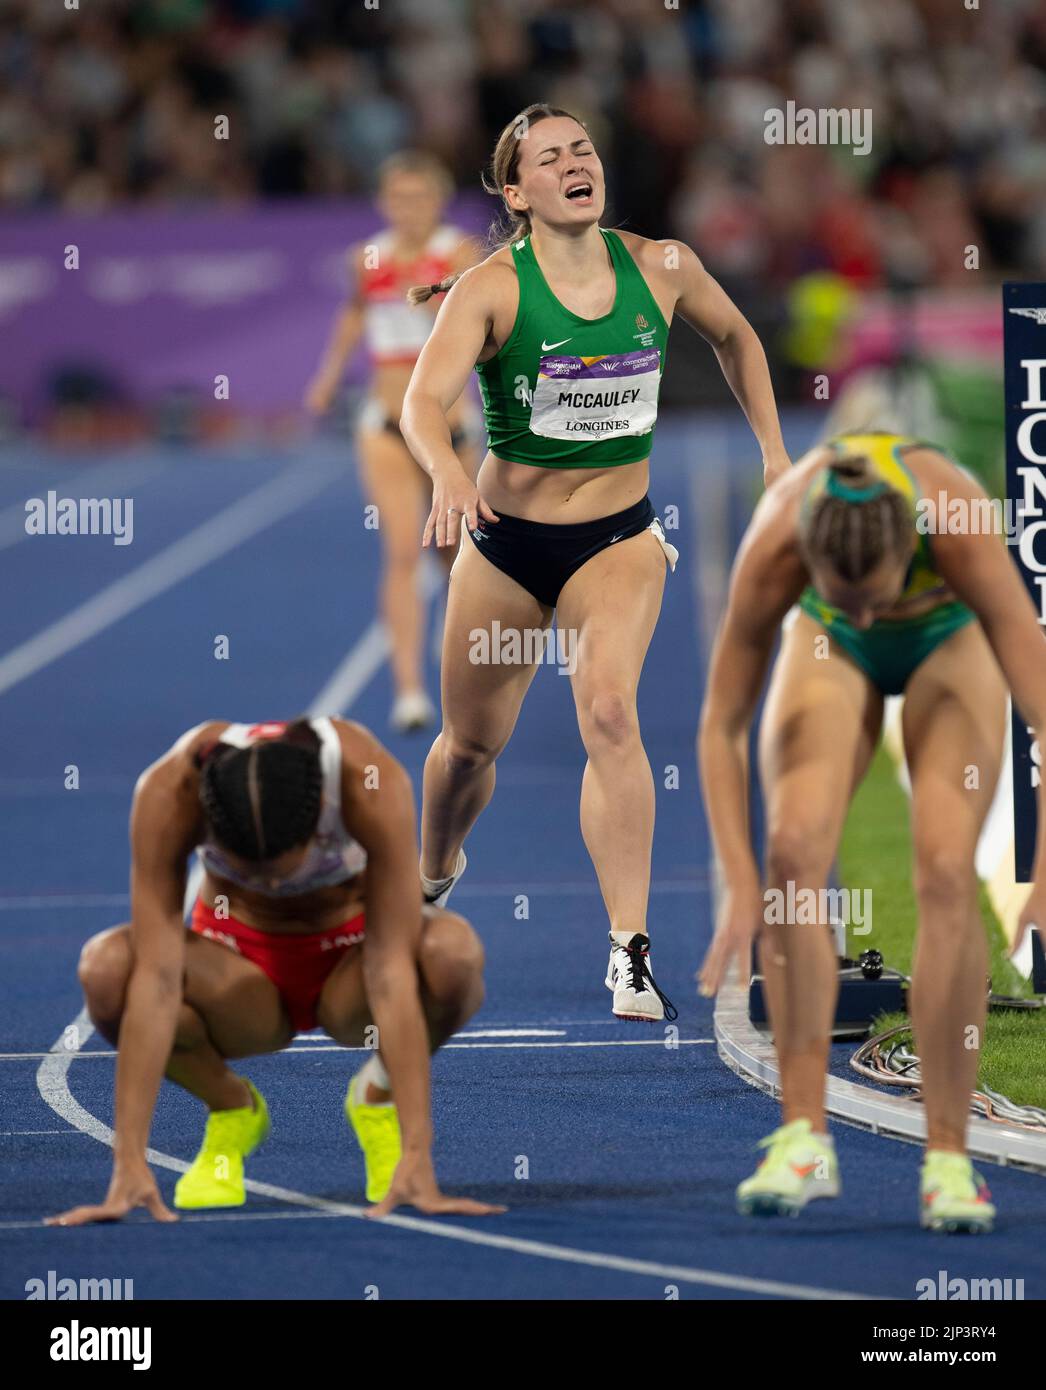 Anna McCauley of Northern Ireland competing in the women's 800m heptathlon at the Commonwealth Games at Alexander Stadium, Birmingham, England, on 2nd Stock Photo